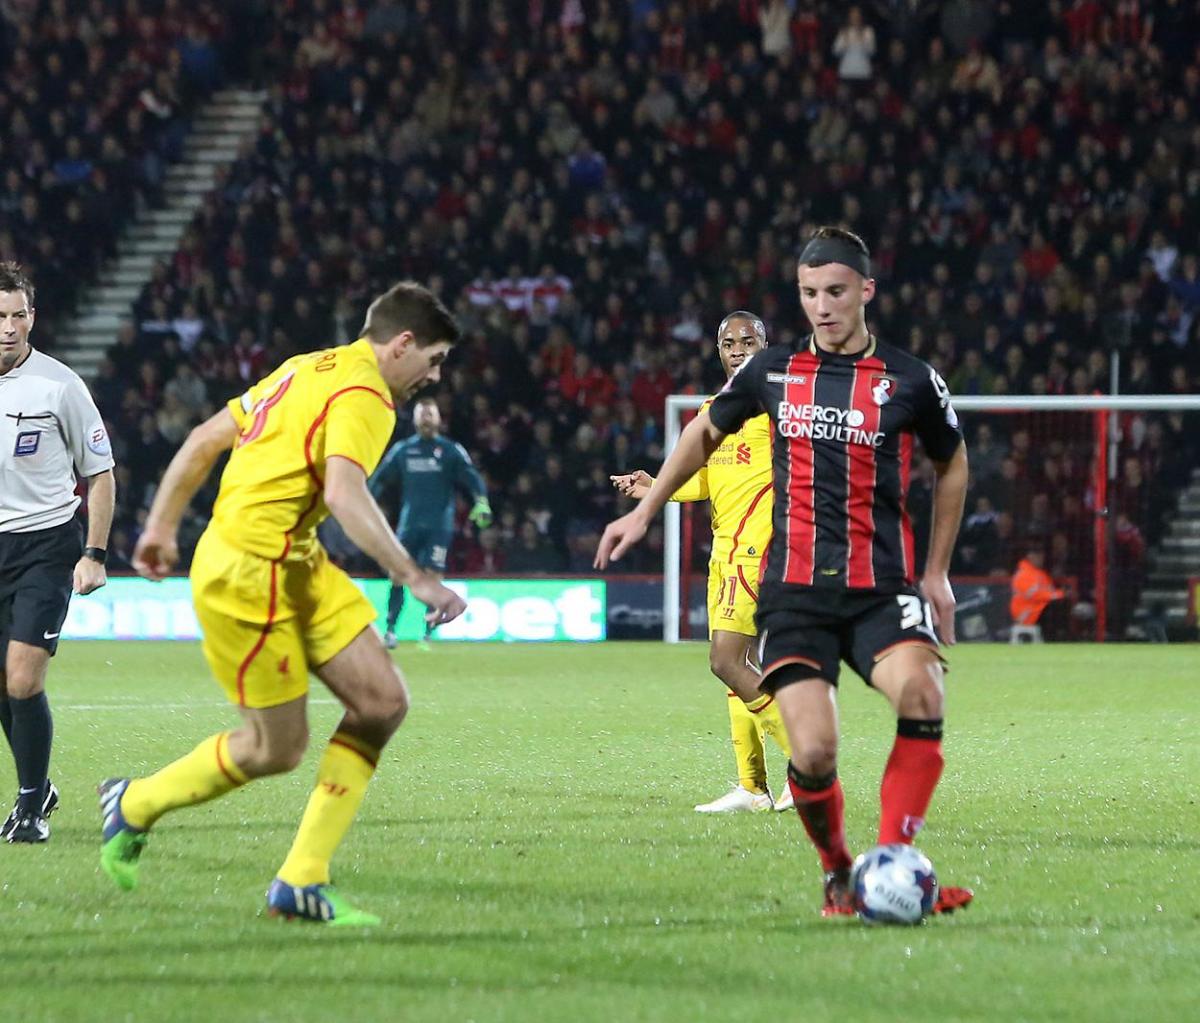 All our images from the Cherries v Liverpool Capital One Cup game on December 17, 2014